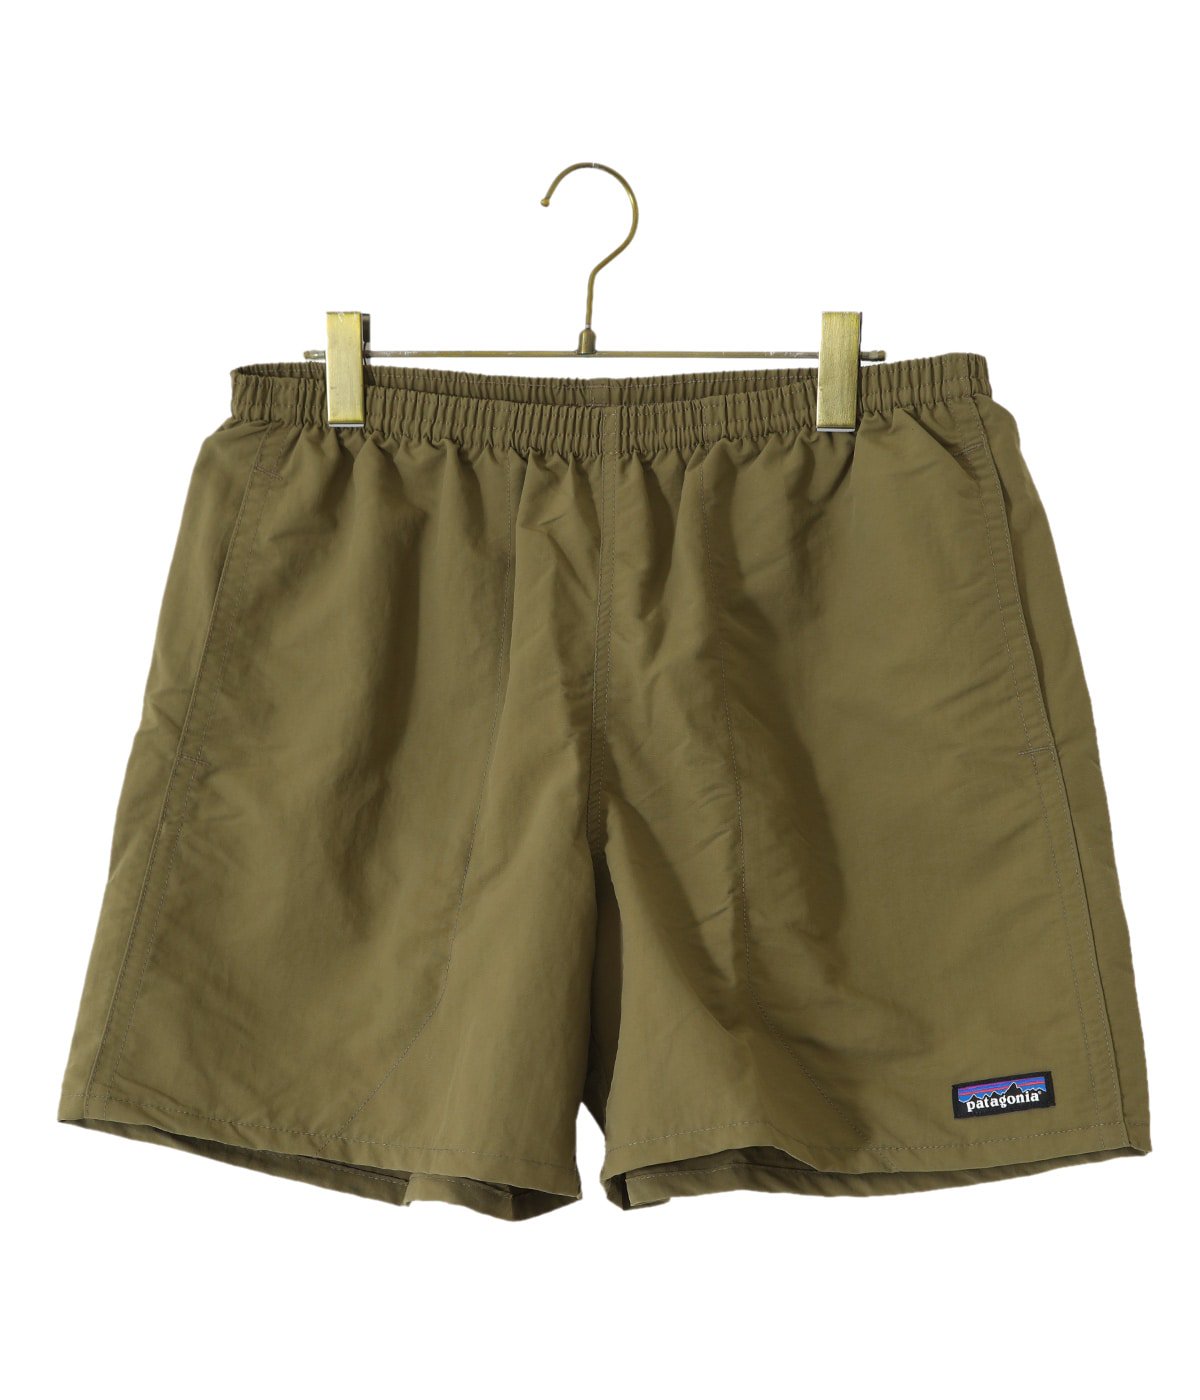 M's Baggies Shorts - 5 in -PLGY-